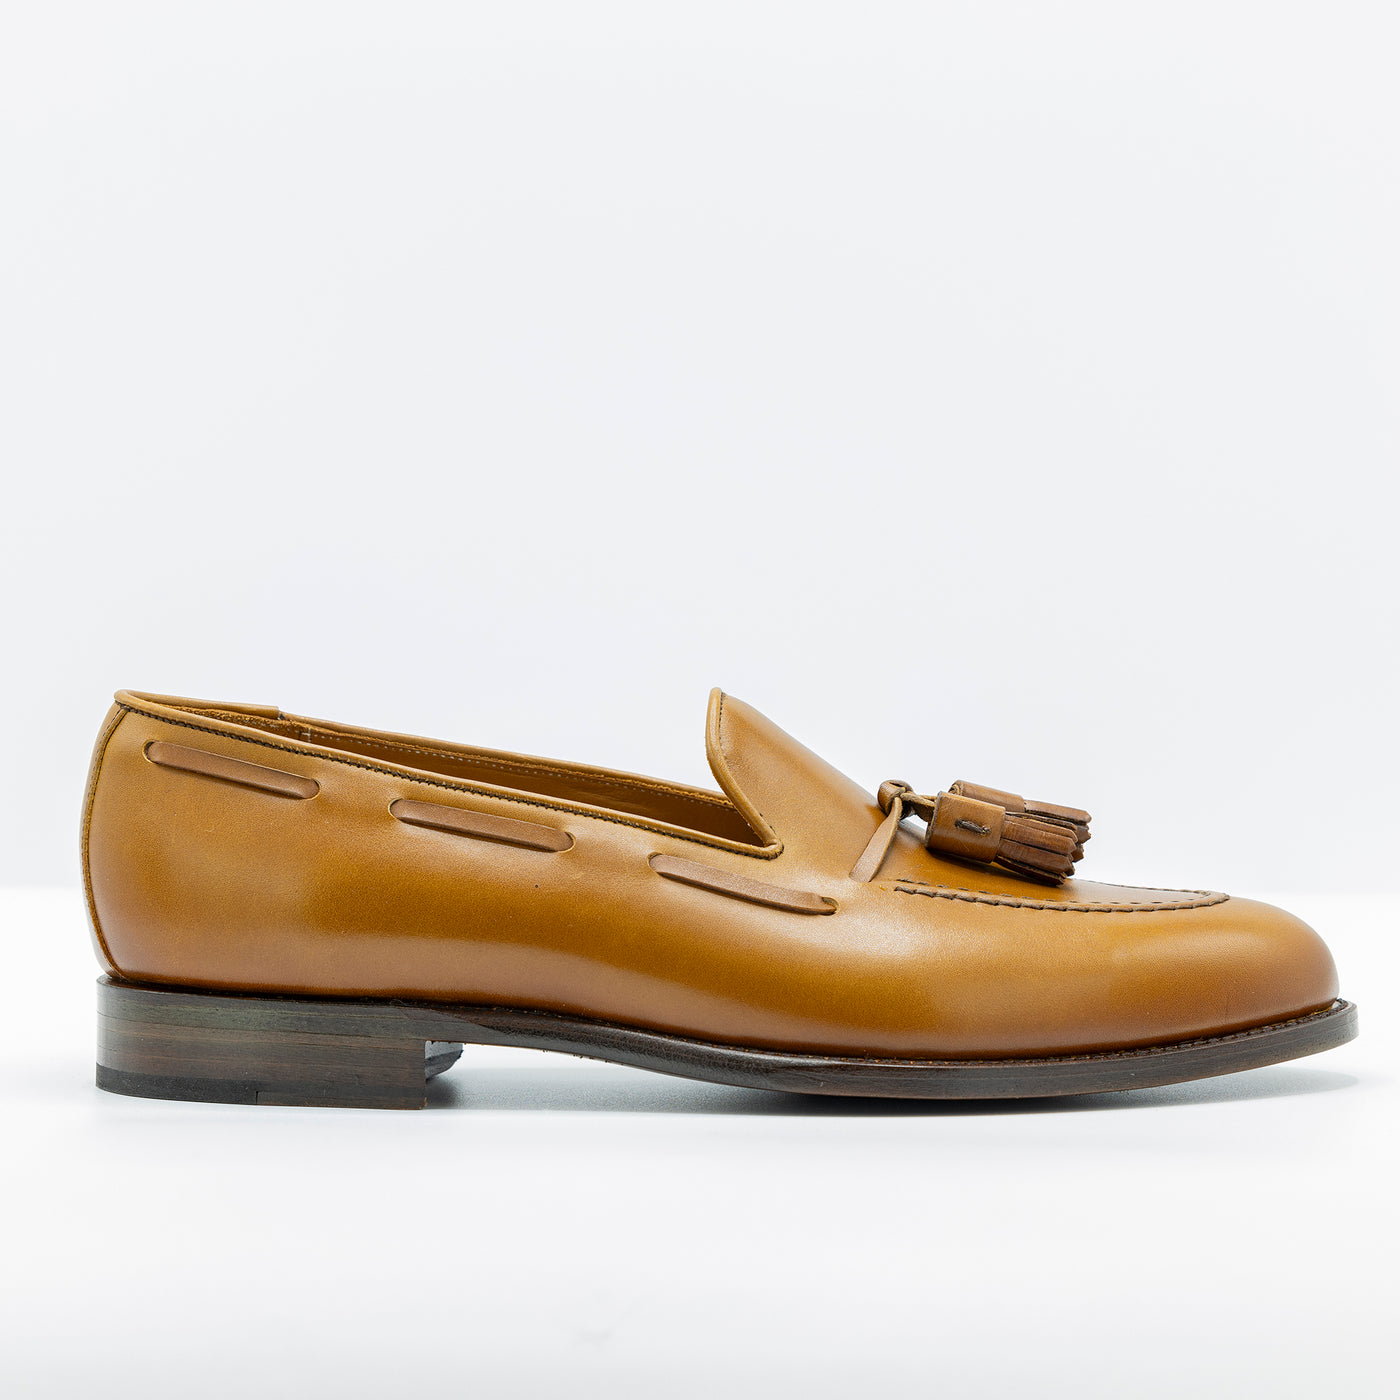 Men's tassel loafer in cognac leather. Set on Good year welt soles sewn by hand. 